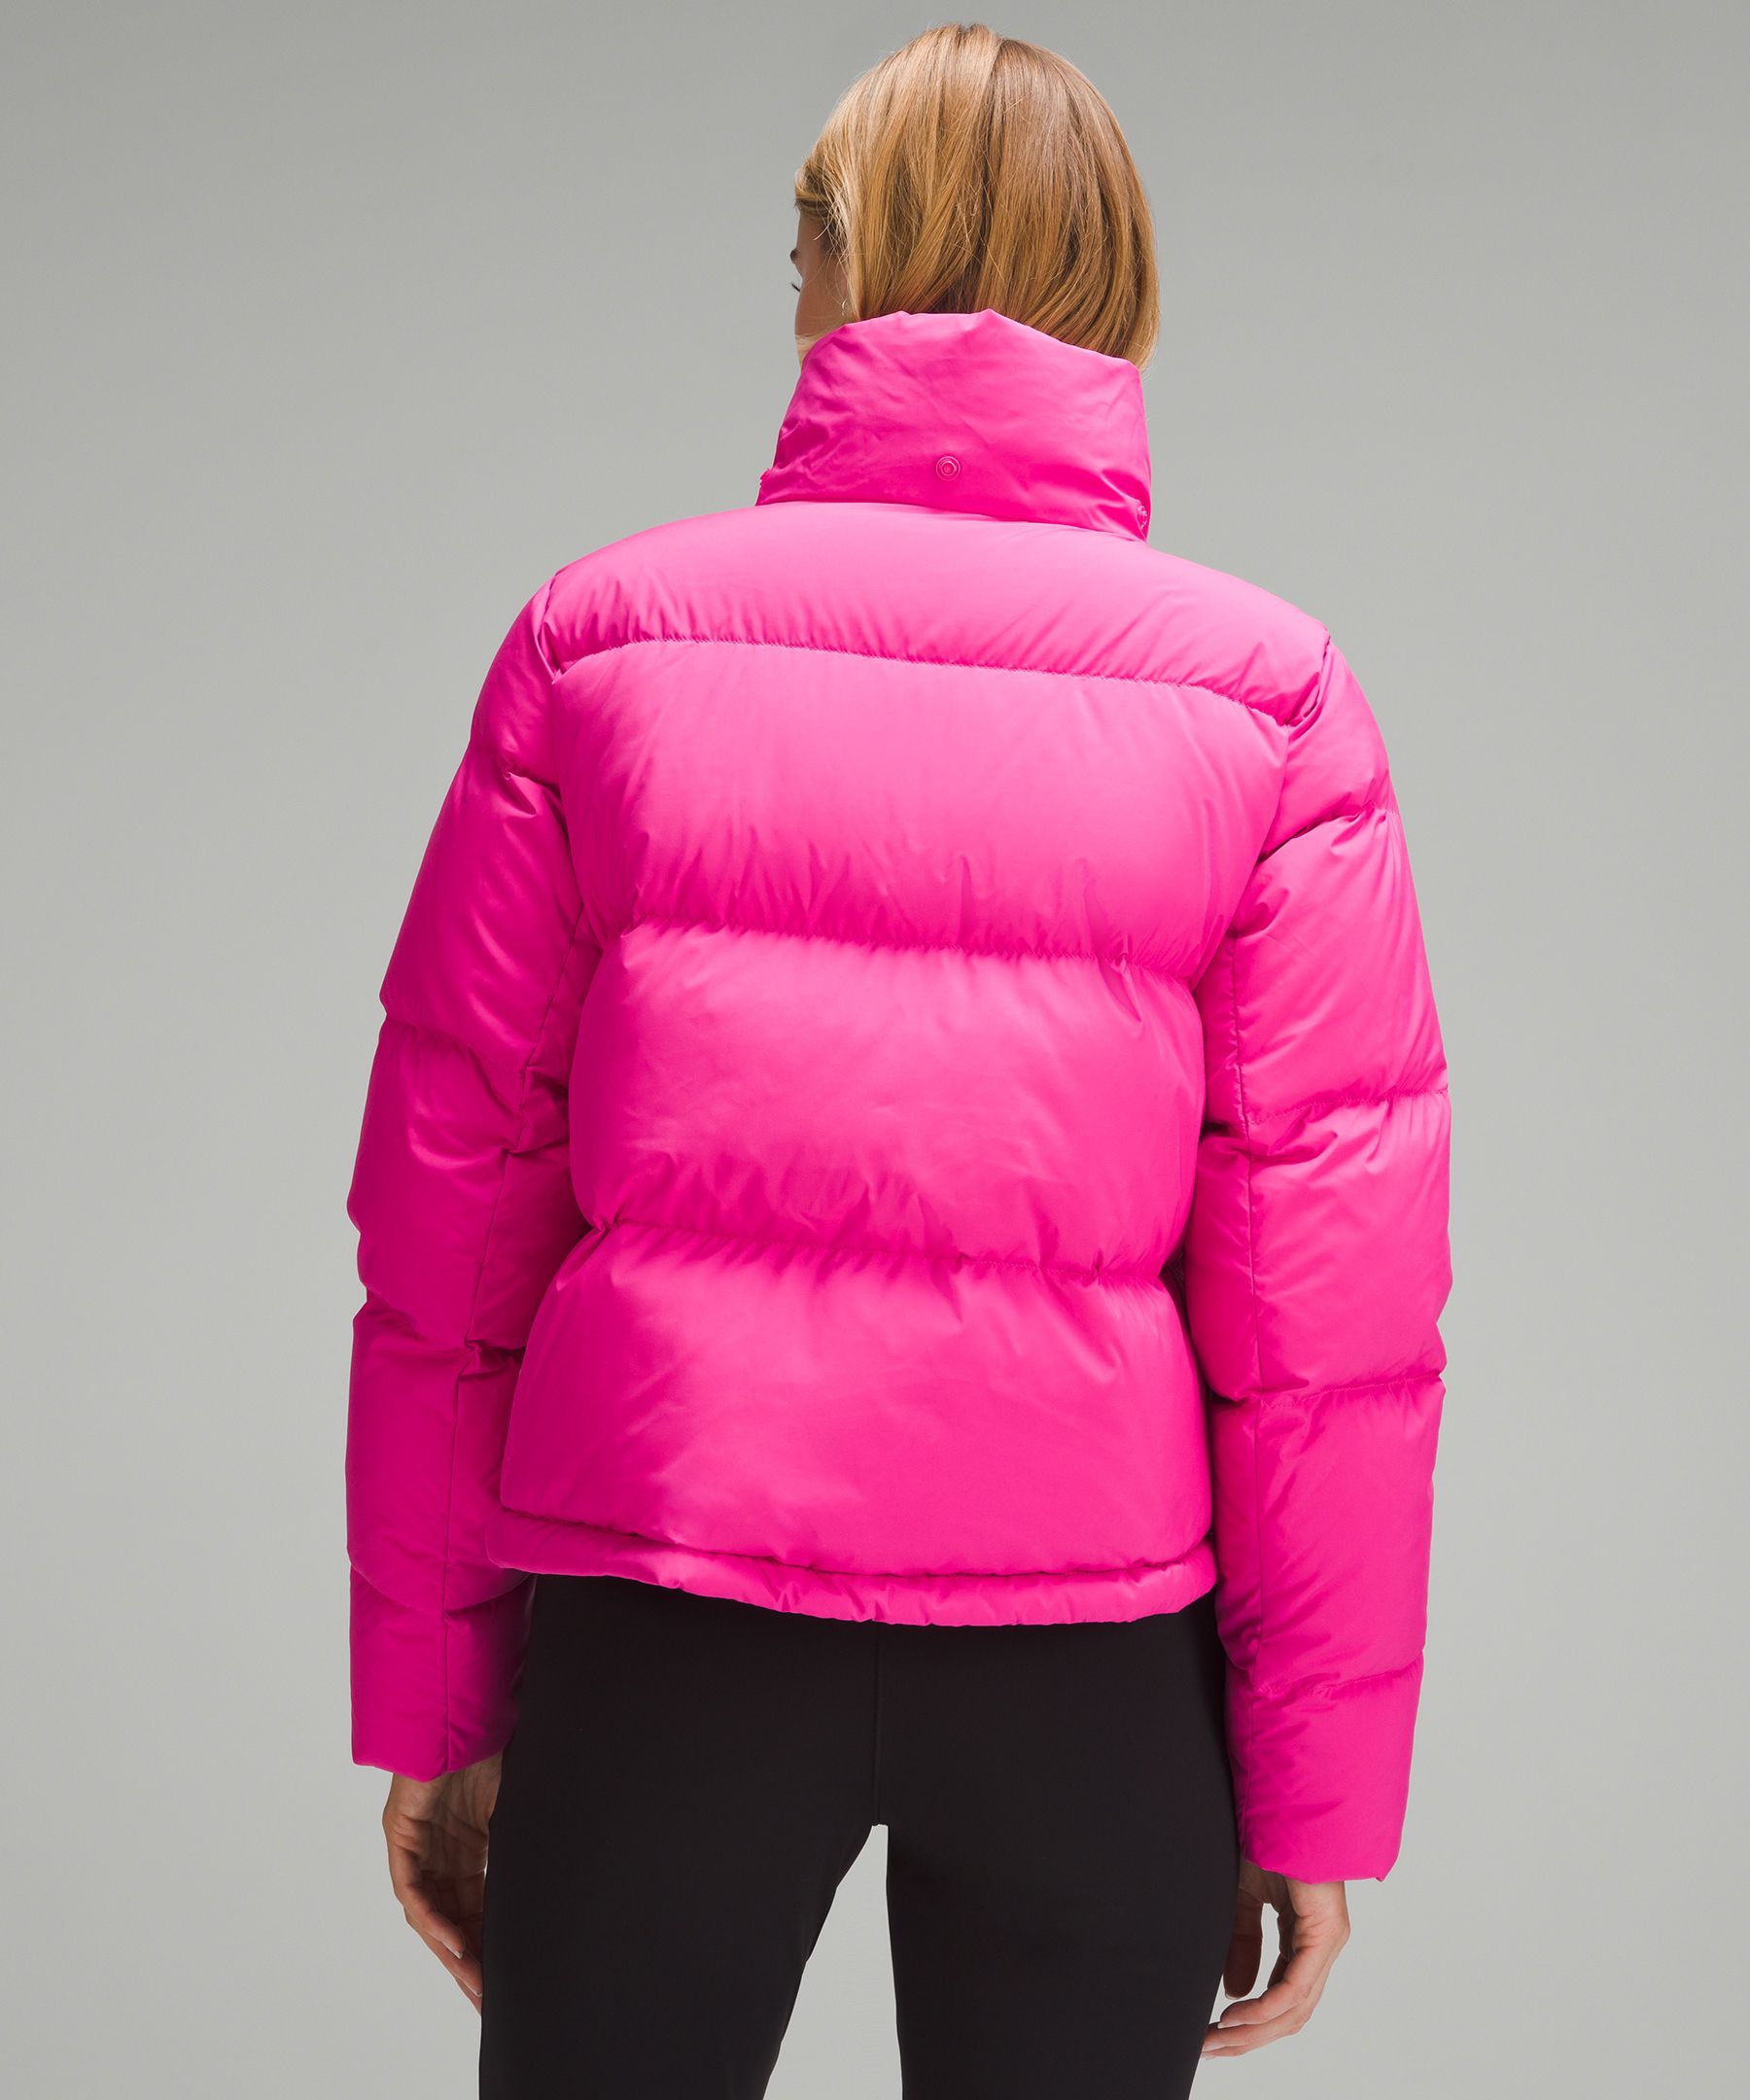 SONIC PINK Wunder Puff Cropped Vest and Jacket - just dropped in